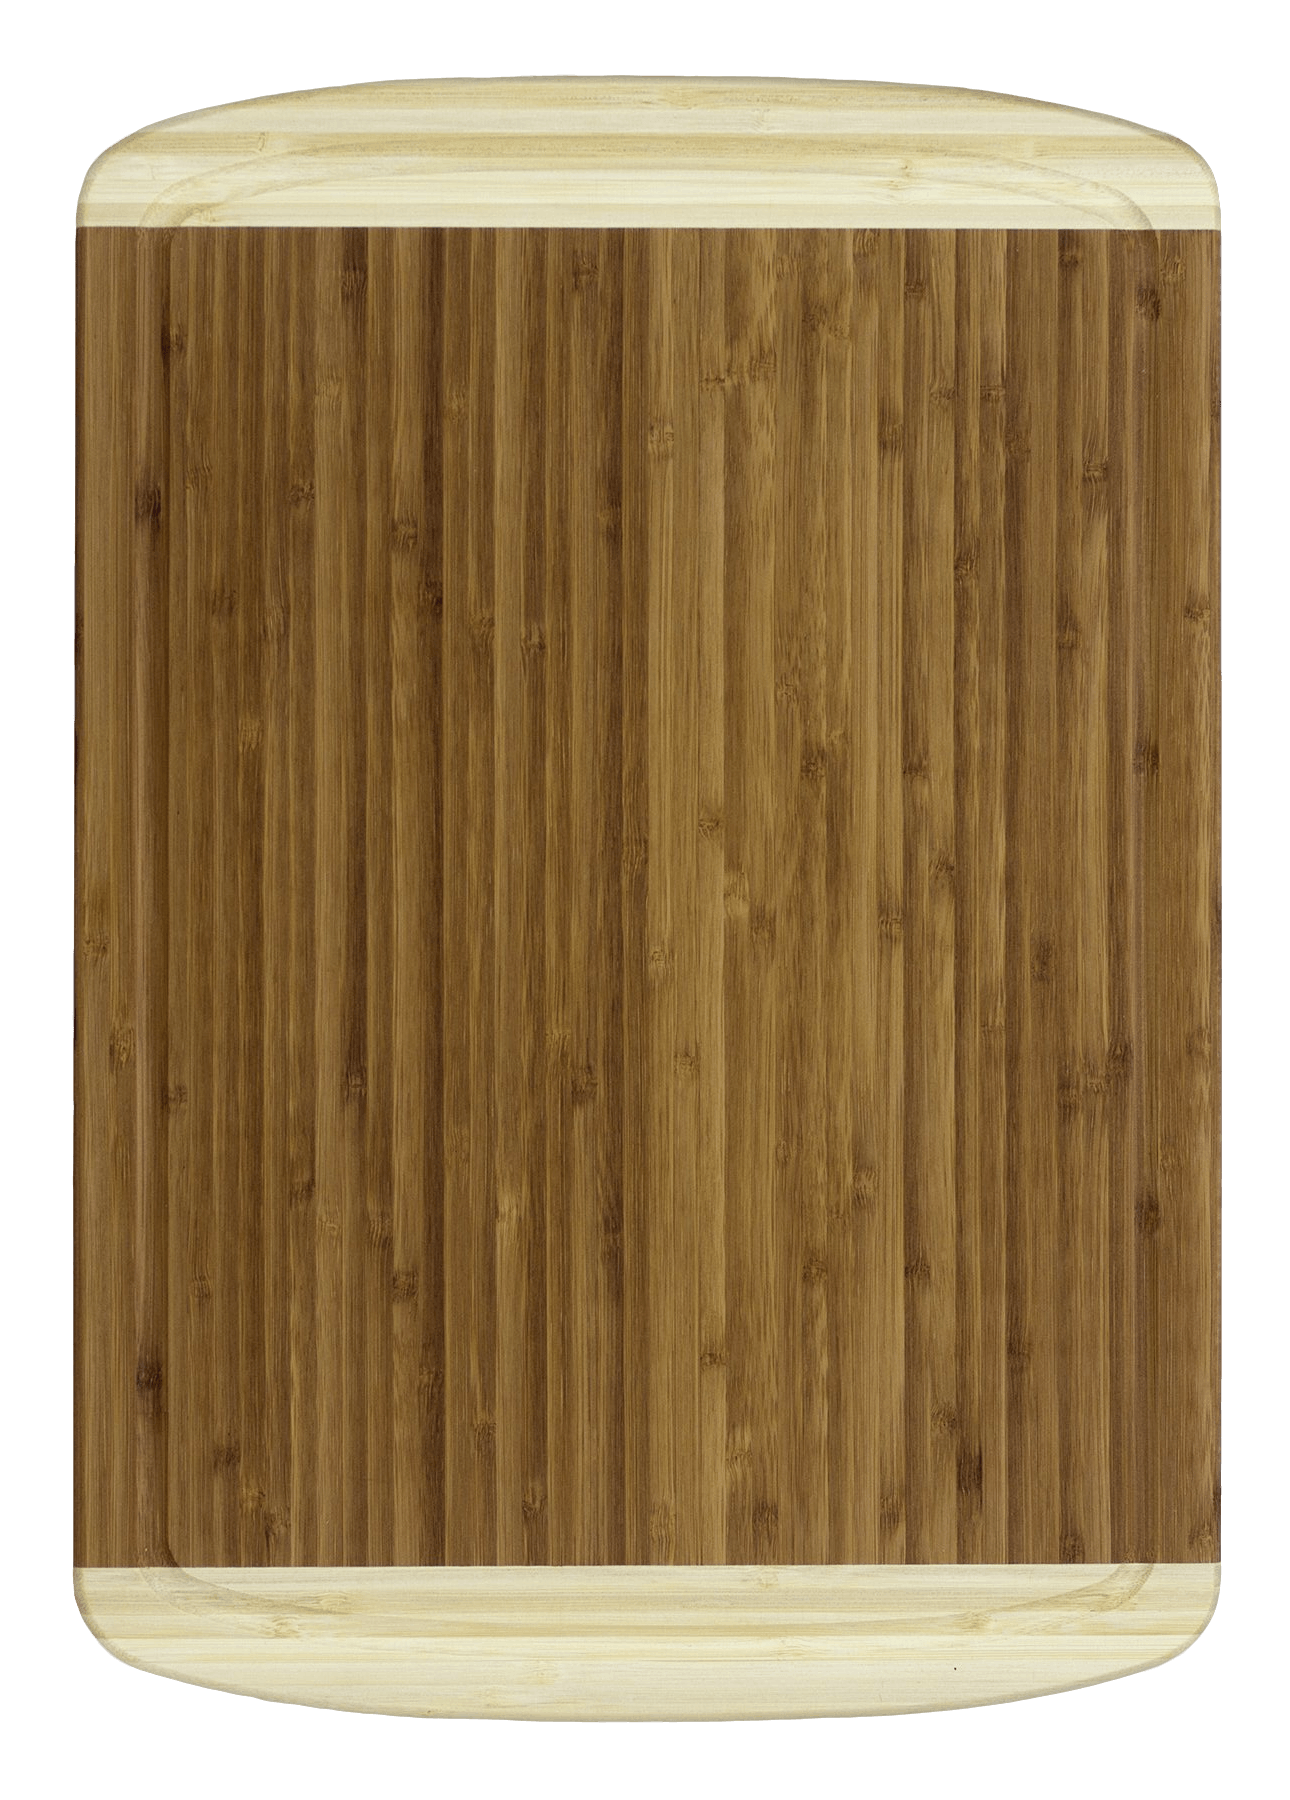 Kona Groove Serving and Cutting Board